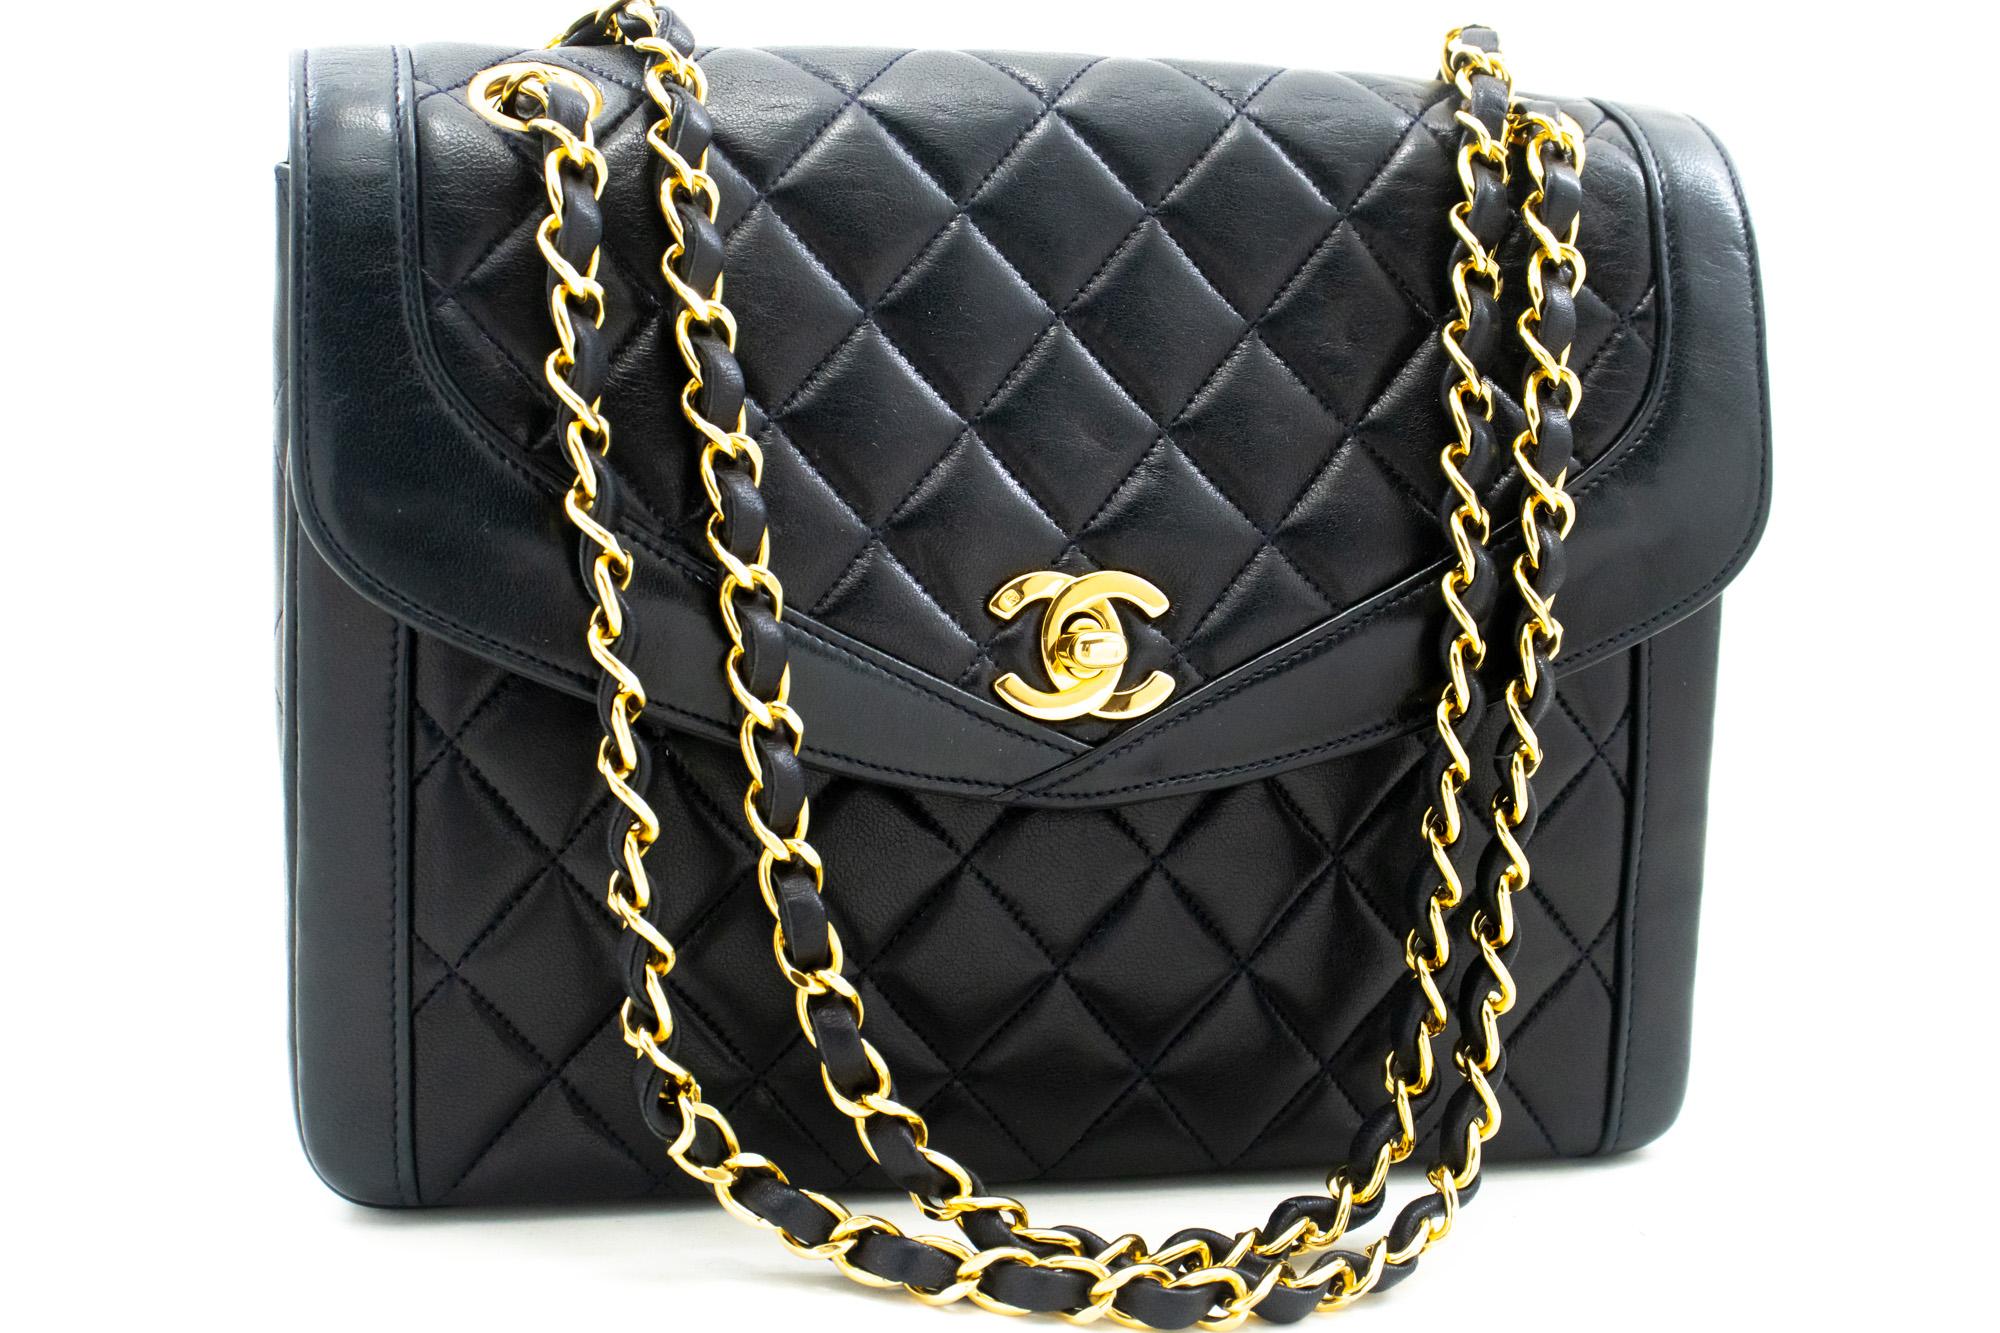 An authentic CHANEL NAVY Vintage Chain Shoulder Bag made of black Lambskin Quilted Flap Purse. The color is Dark Navy. The outside material is Leather. The pattern is Solid. This item is Vintage / Classic. The year of manufacture would be